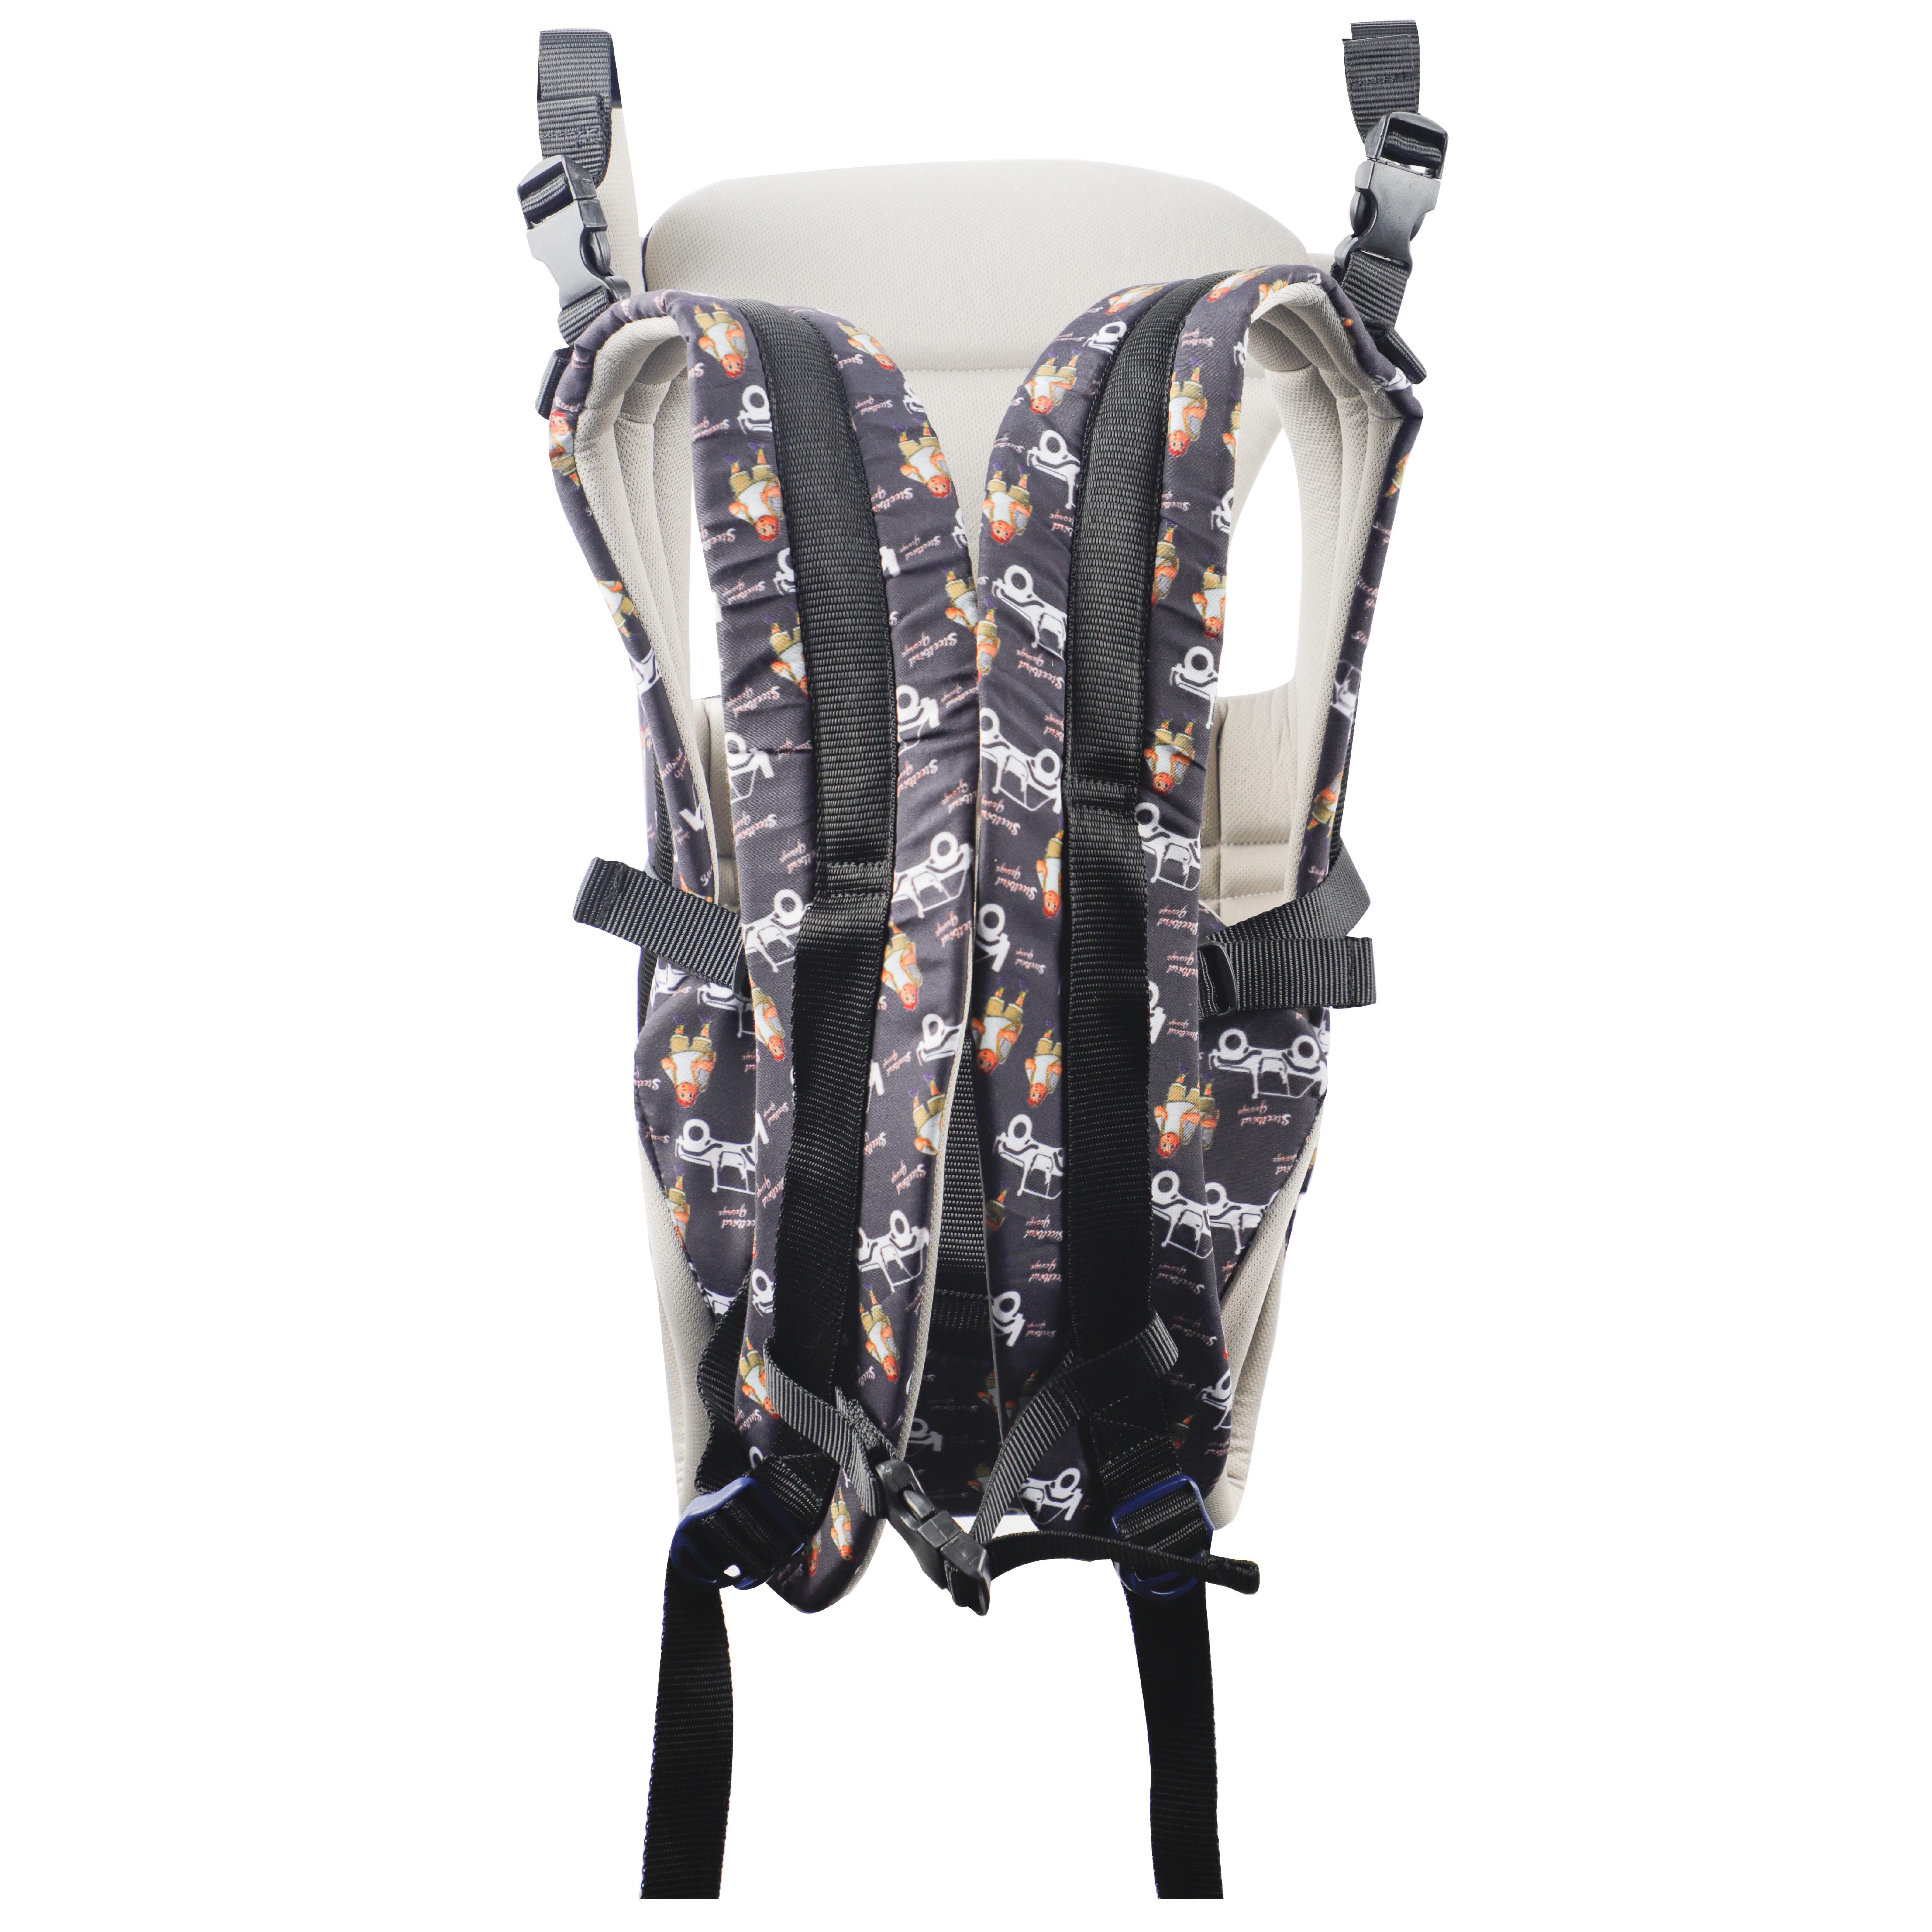 Steelbird Premium Kids 4-in-1 Adjustable Baby Carrier Cum Kangaroo Bag With Lumbar Support-Lightweight And Breathable-Back-Front Carrier For Baby With Safety Belt-Max Weight Up To 15 Kg (Grey George)